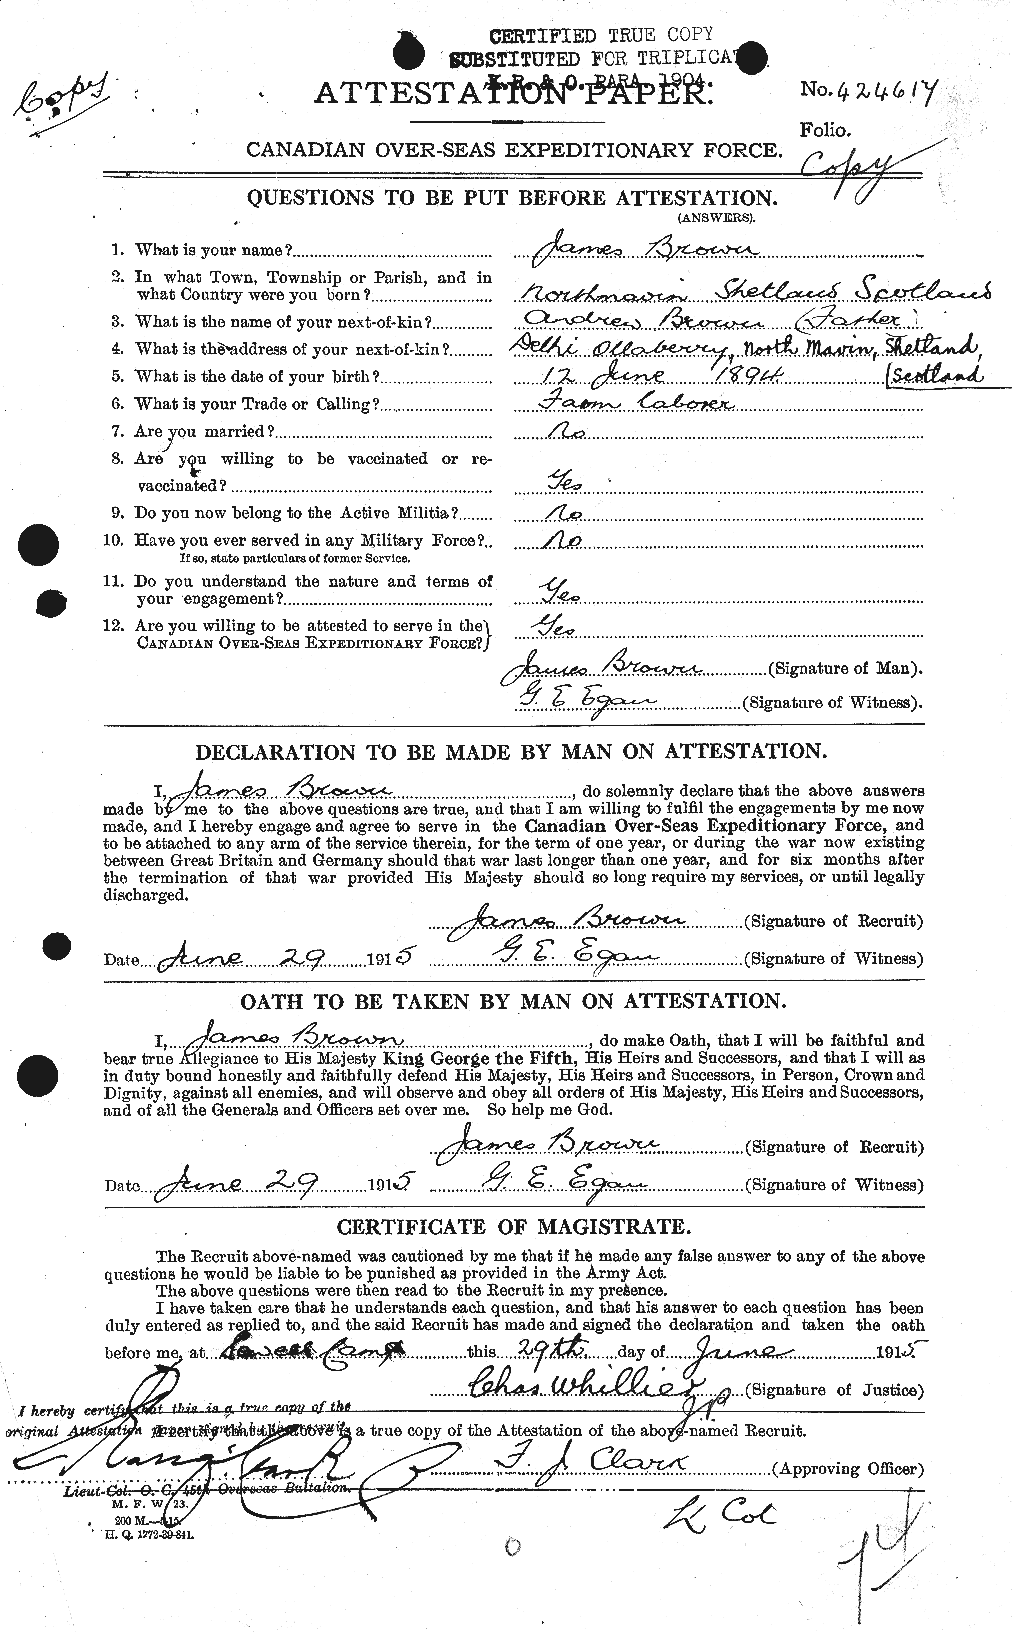 Personnel Records of the First World War - CEF 265695a